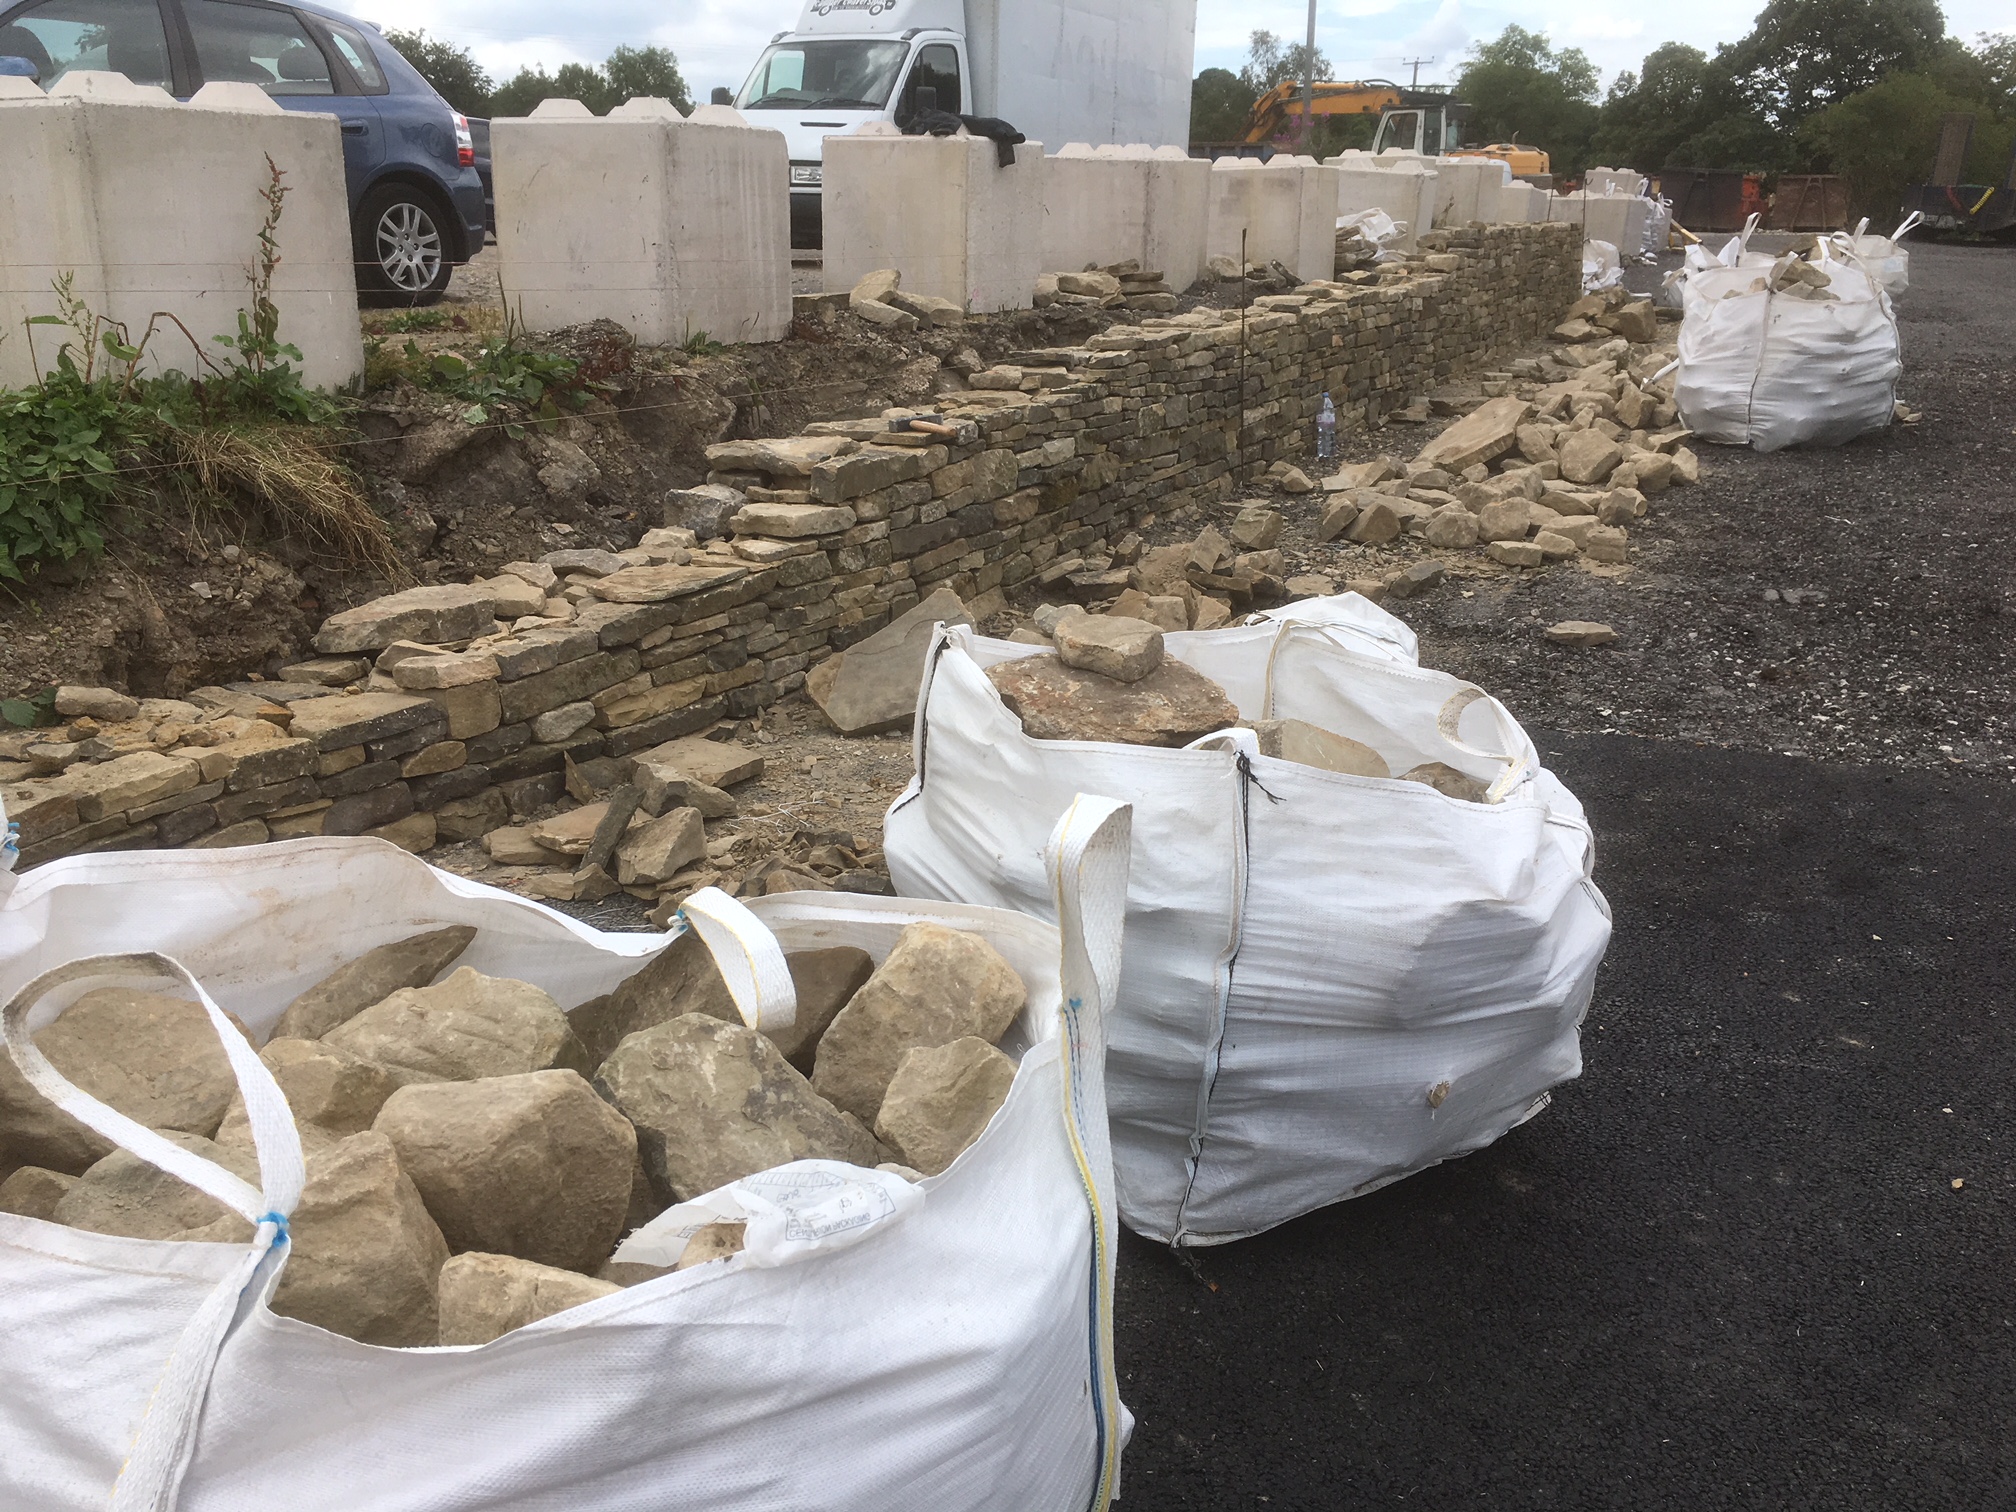 10 bulk bags Yorkshire Dry Stone Walling, each bag 1tonne, which approximately equates to 1m² of - Image 5 of 9